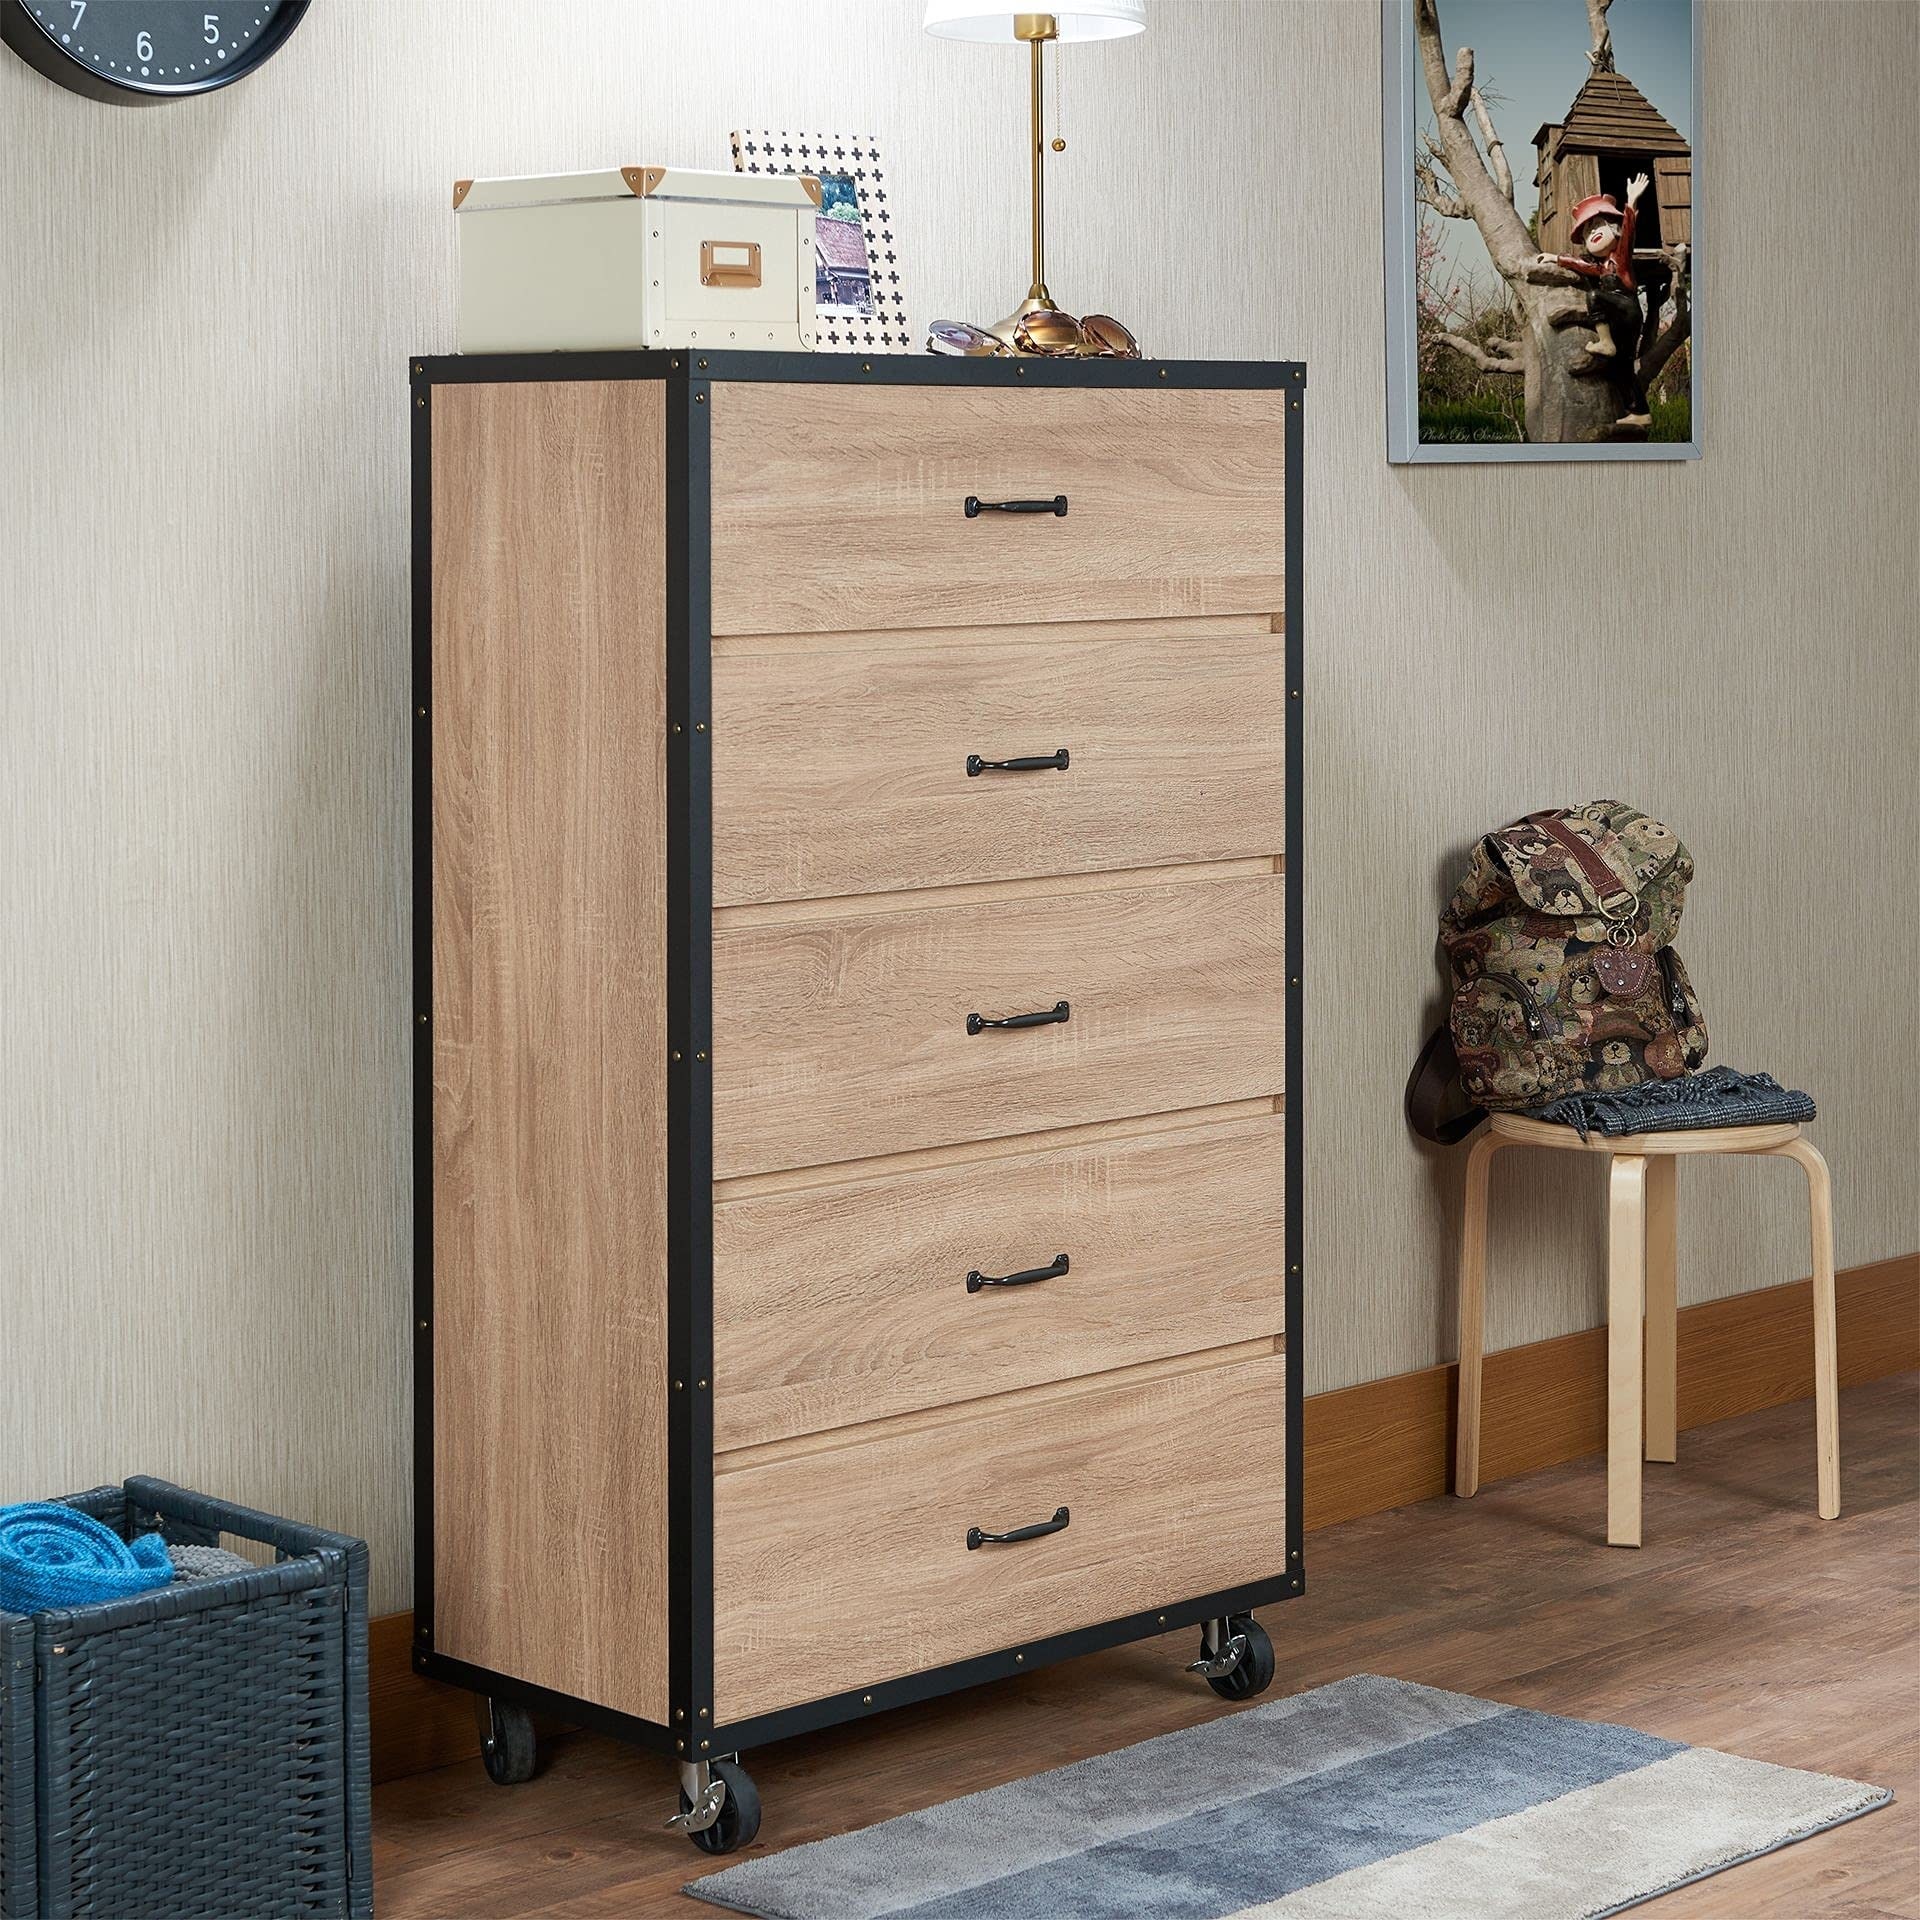 https://ak1.ostkcdn.com/images/products/is/images/direct/38d697b770ac5f49e1e84ac2601d2d27619d04fd/Modern-5-Drawers-Dresser-with-Wheels-Feet%2C-Oak-Wood-5-Drawers-Chest-Dresser-Storage-Cabinet-Chest-of-Drawer-with-Metal-Handles.jpg